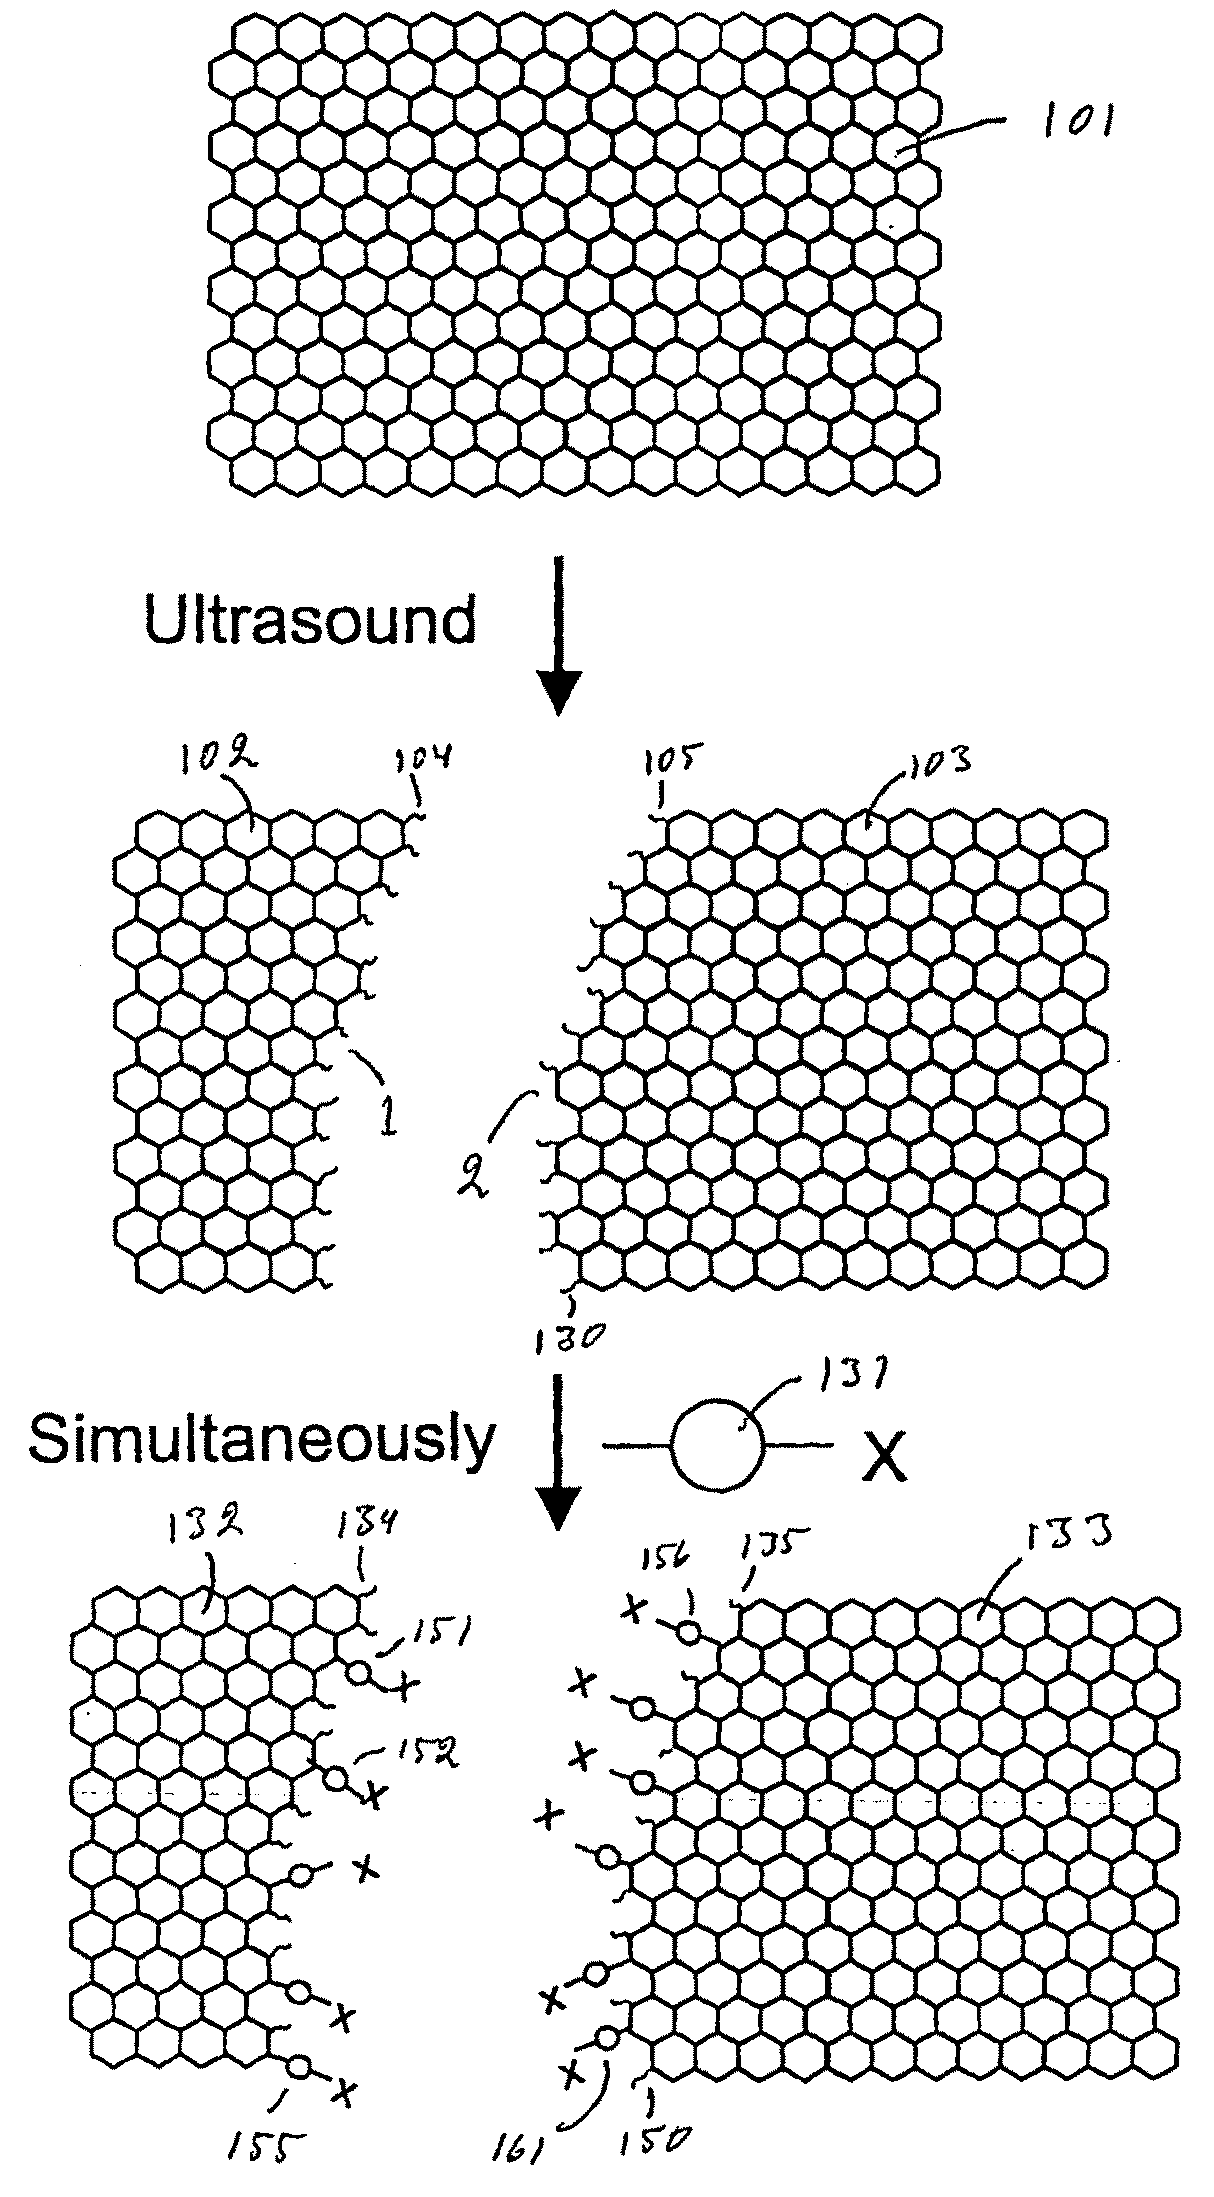 Novel hybride materials and related methods and devices